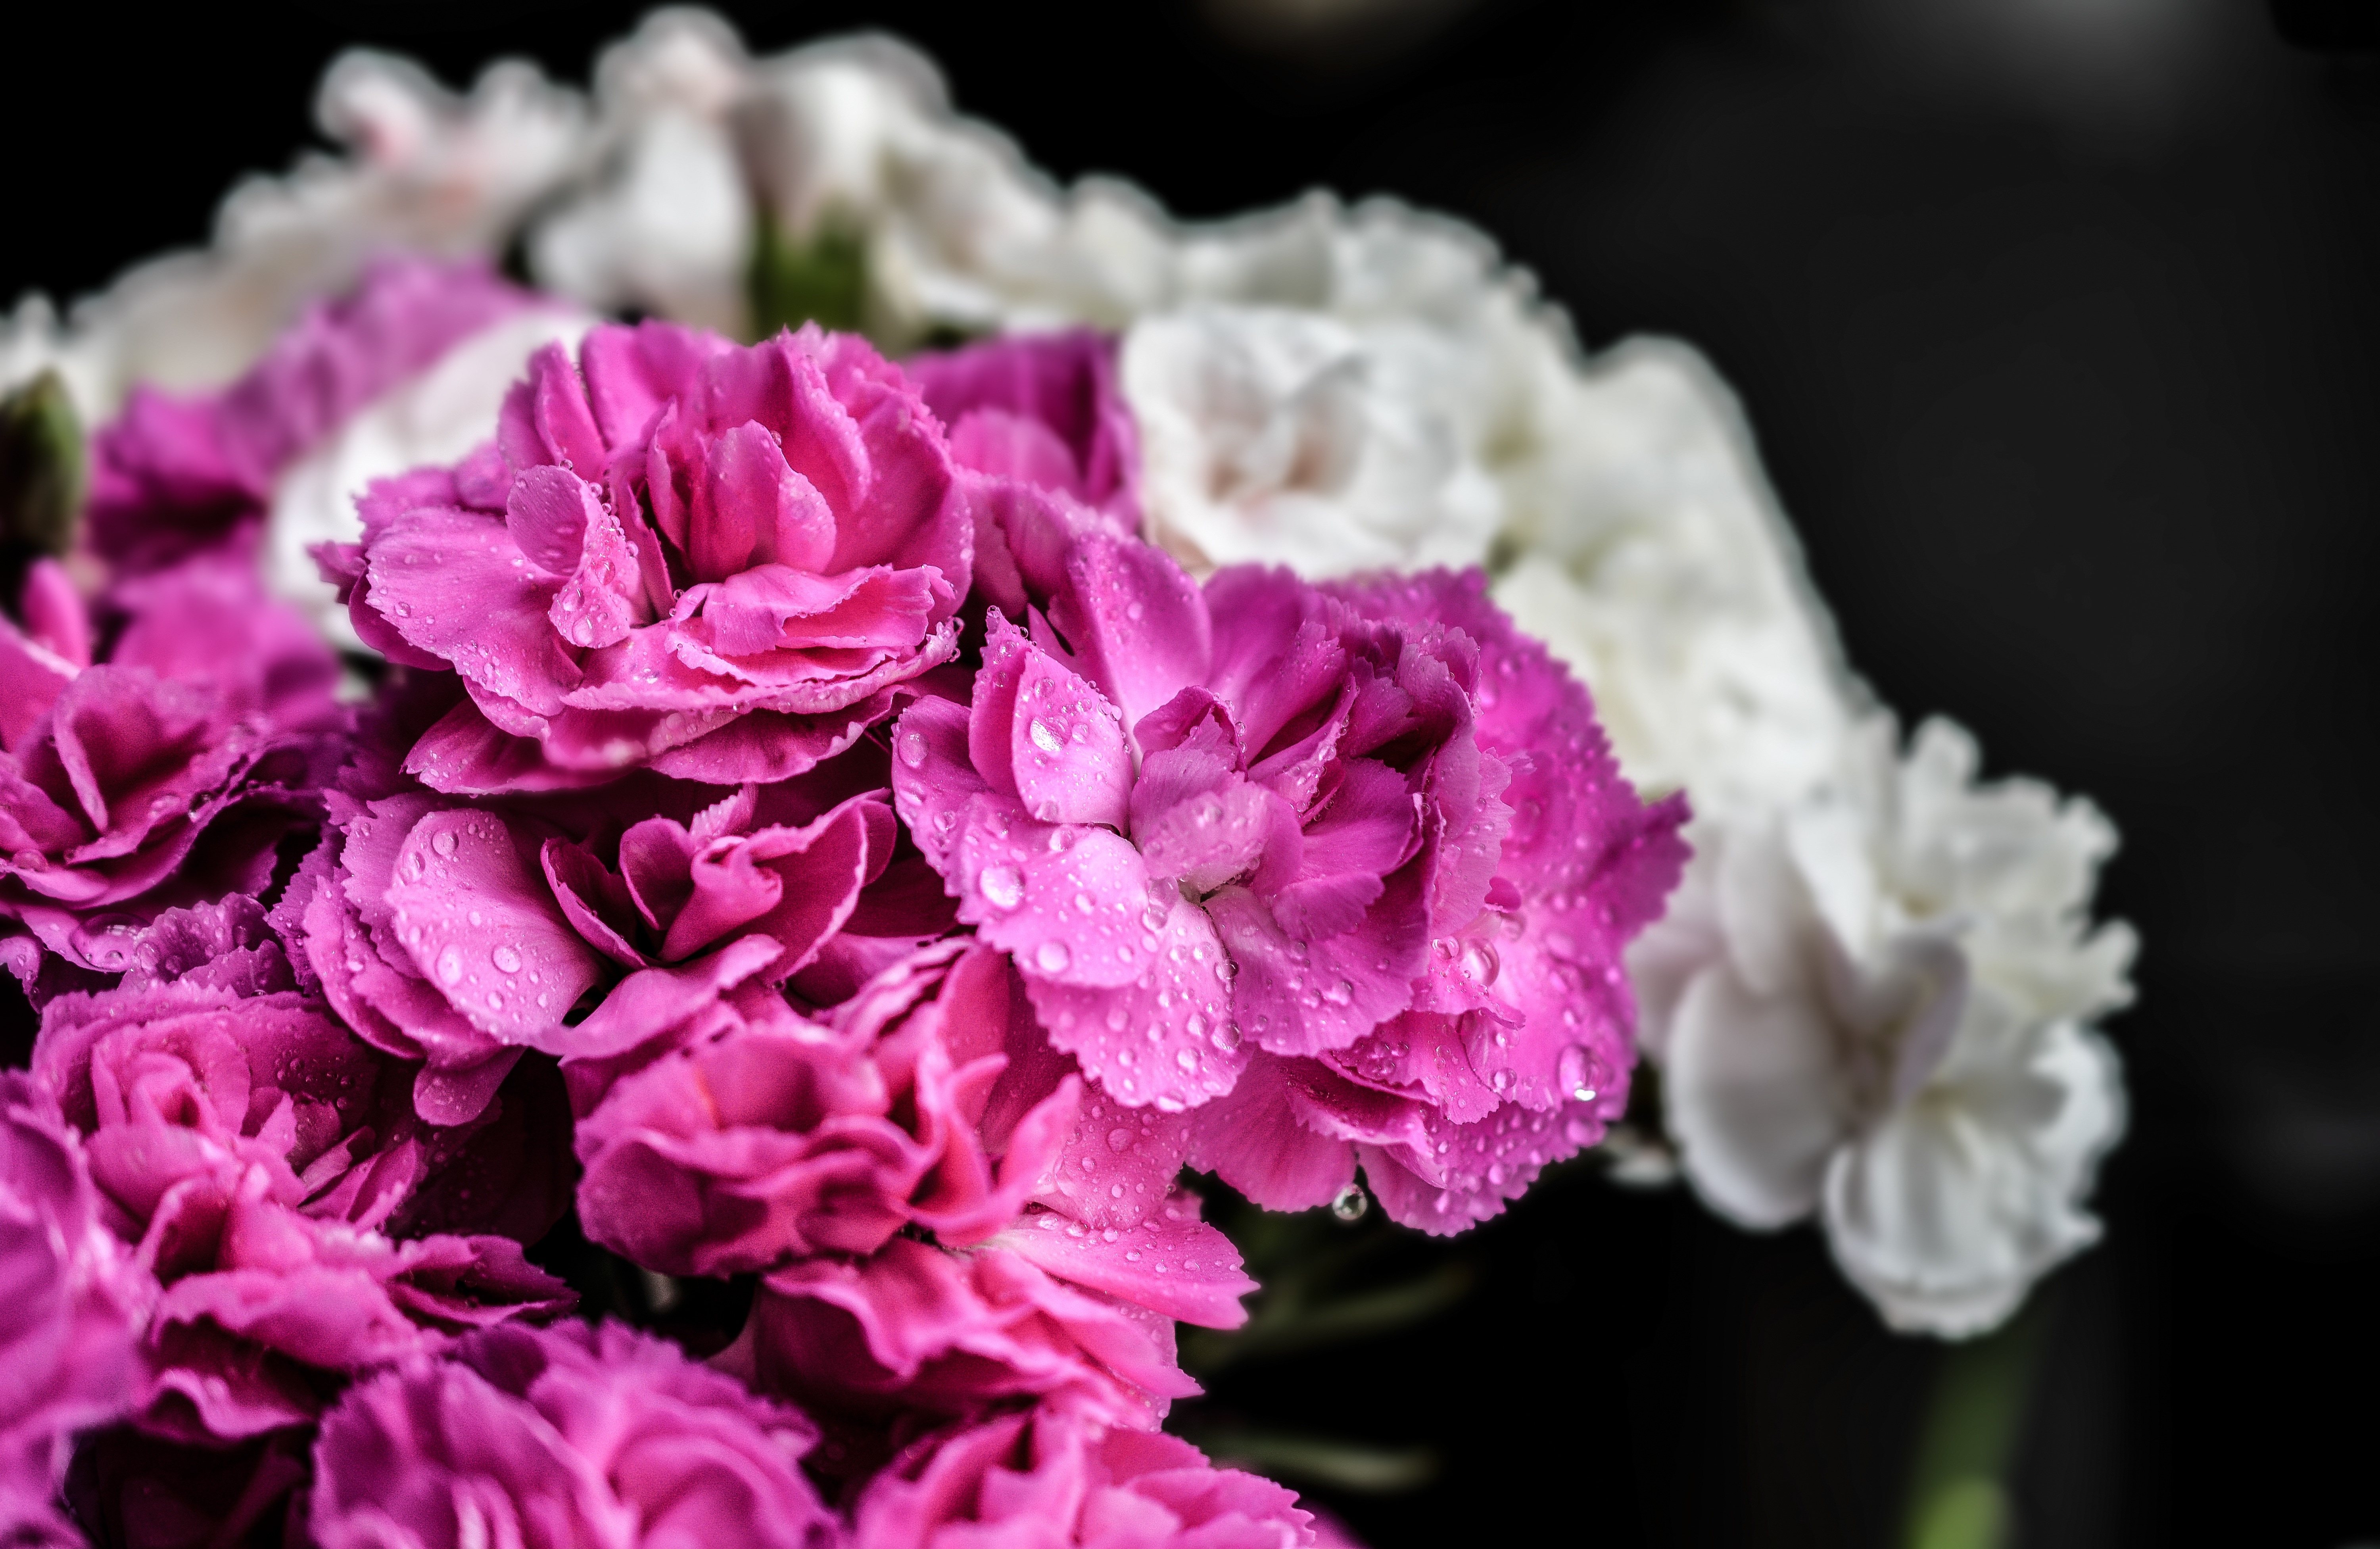 pink and white petaled flowers